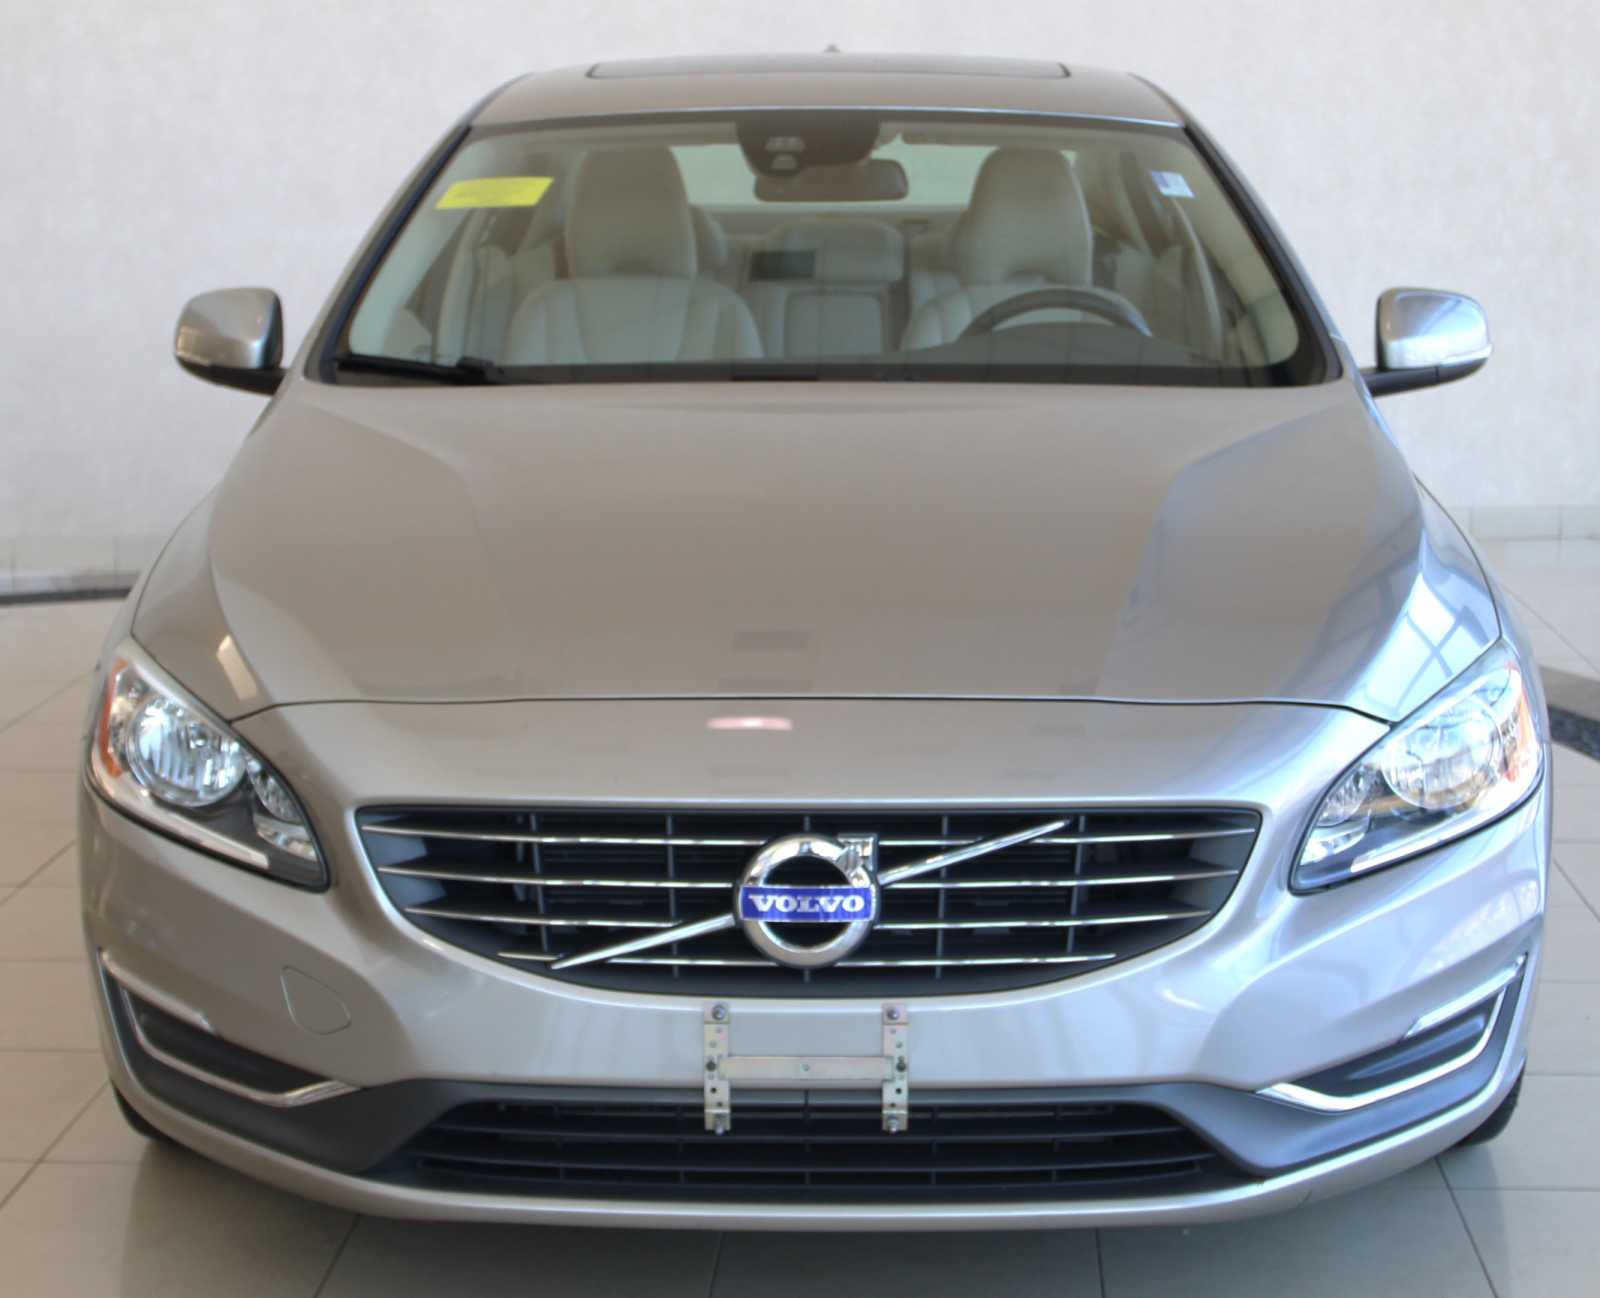 Used 2014 Volvo S60 T5 Premier Plus with VIN YV1612FH3E1290066 for sale in Sharon, MA